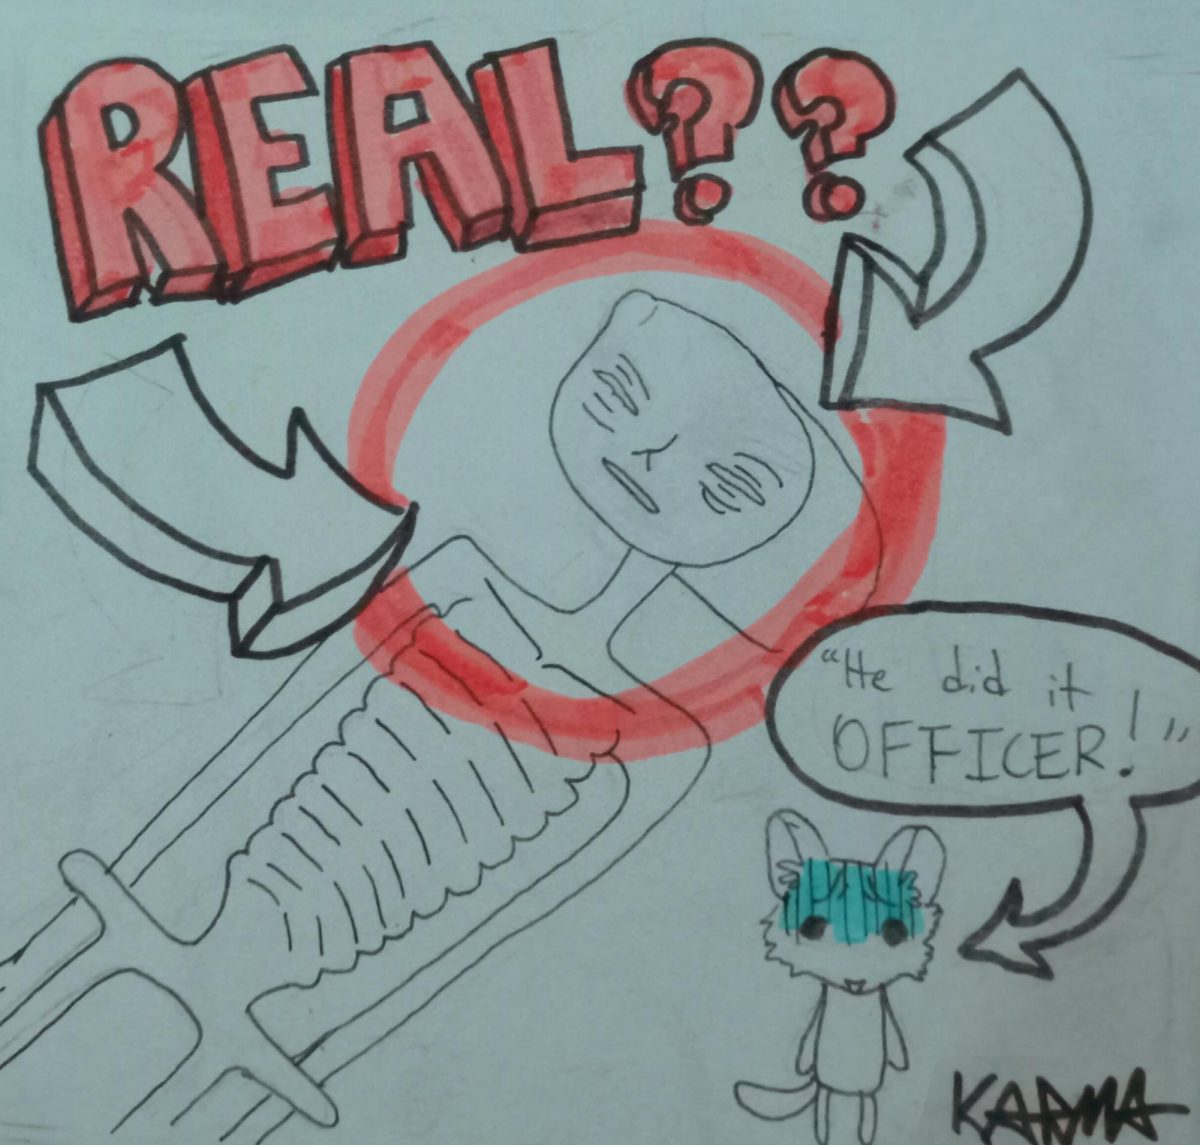 A drawing of an alien, with exaggerated red circles and arrows and REAL?? surrounding it. A small figure at the bottom says He did it OFFICER!